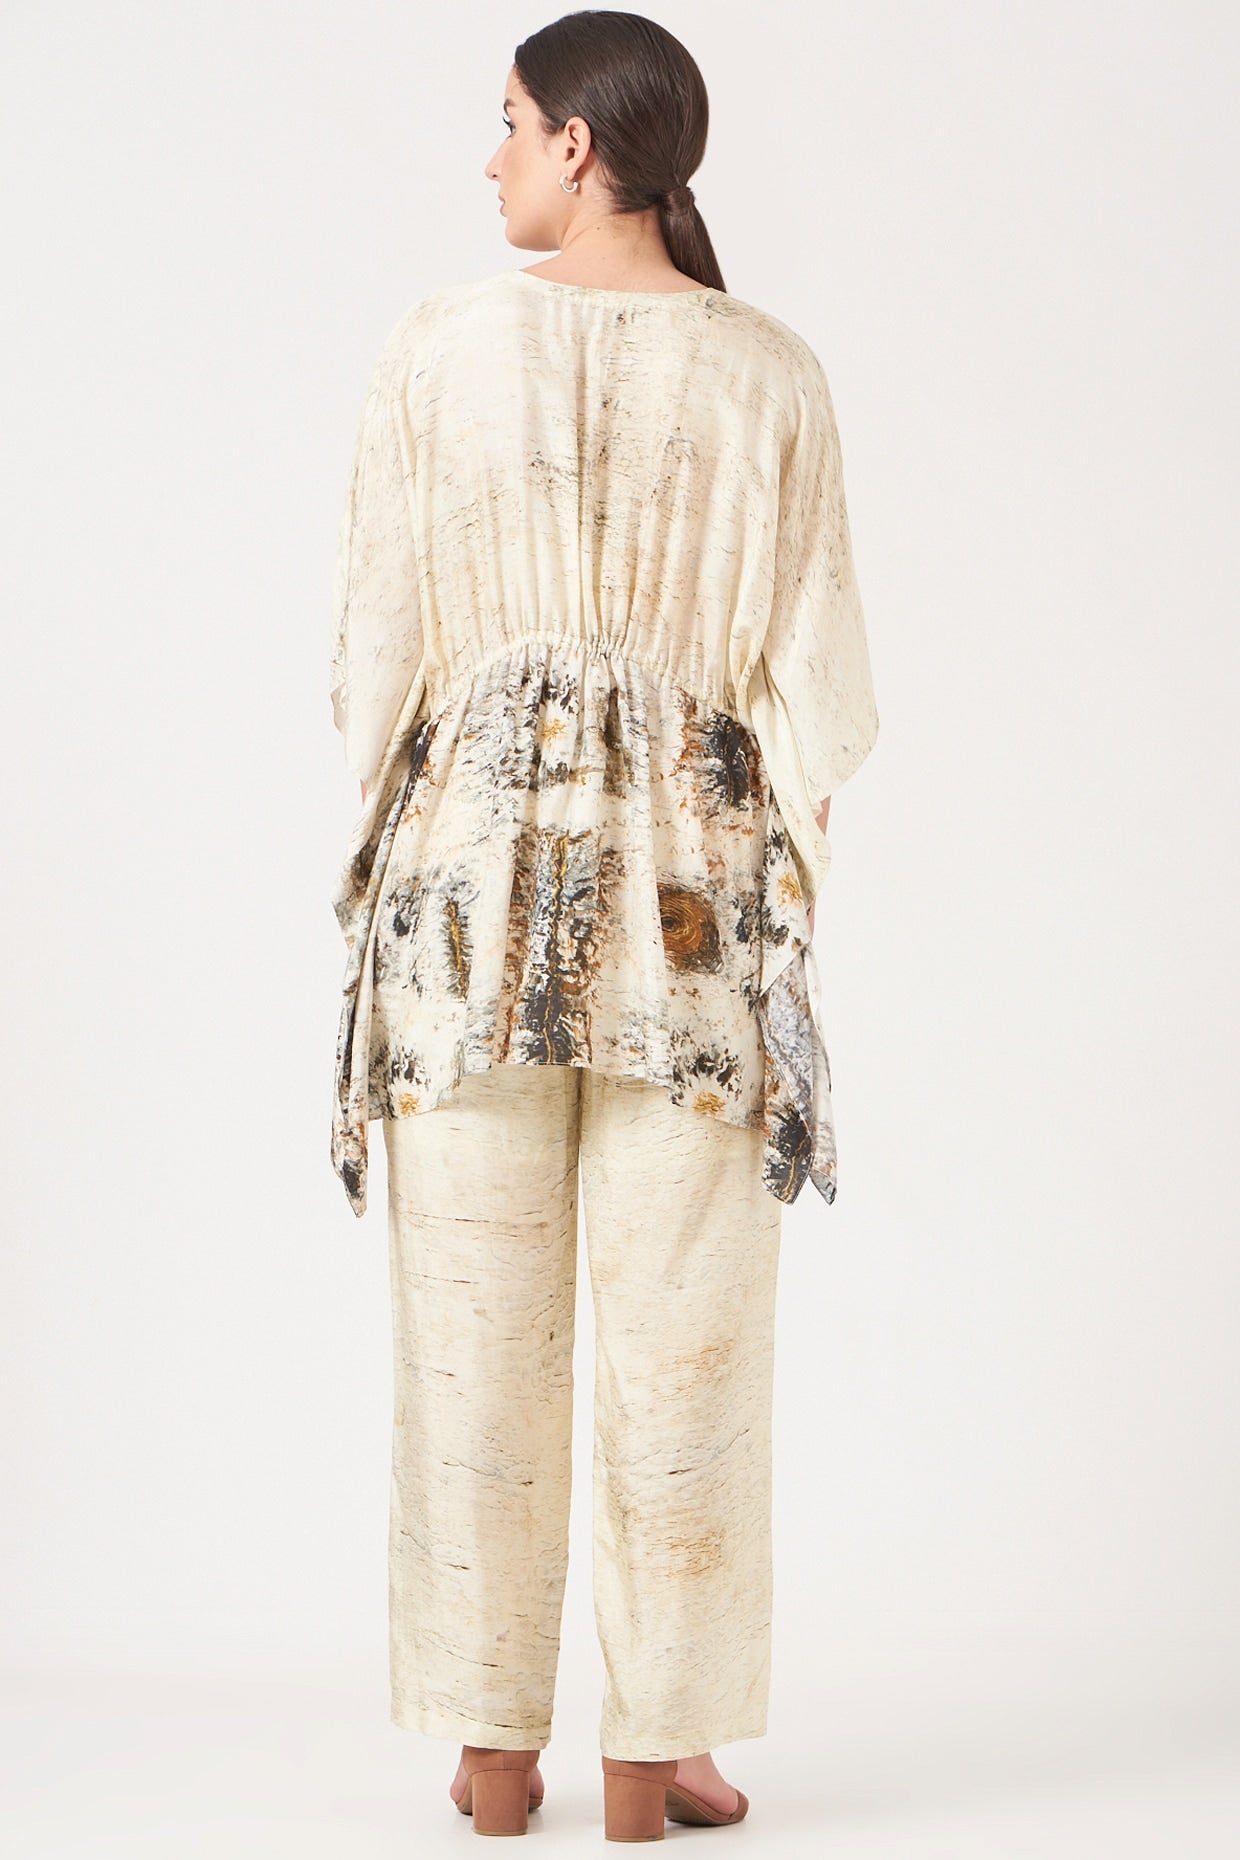 Beige And Gold Divine Print Top And Pants Coord Set.